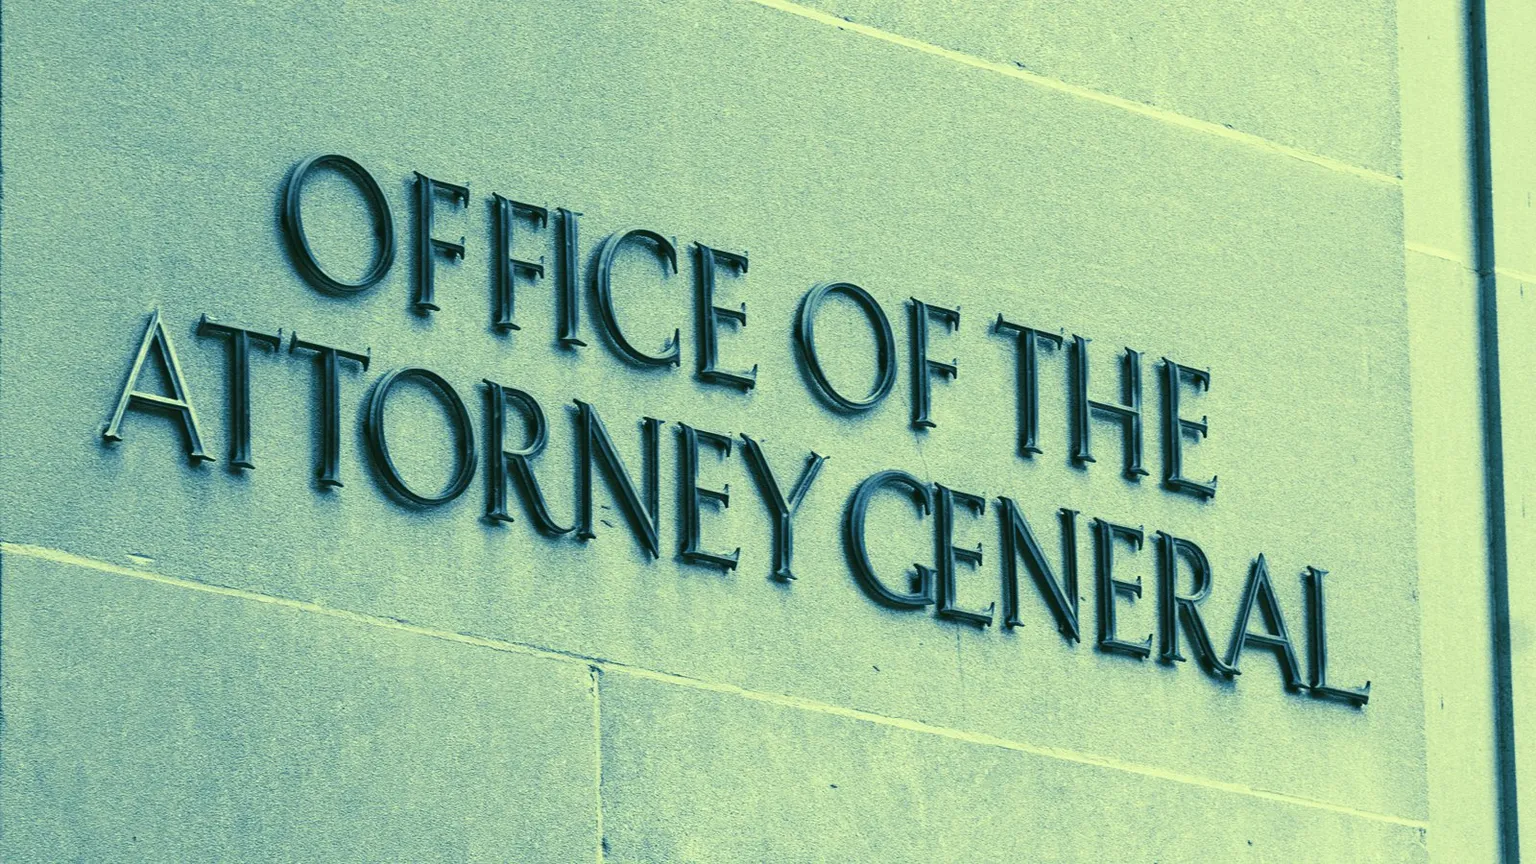 The Attorney General's Office. Image: Shutterstock